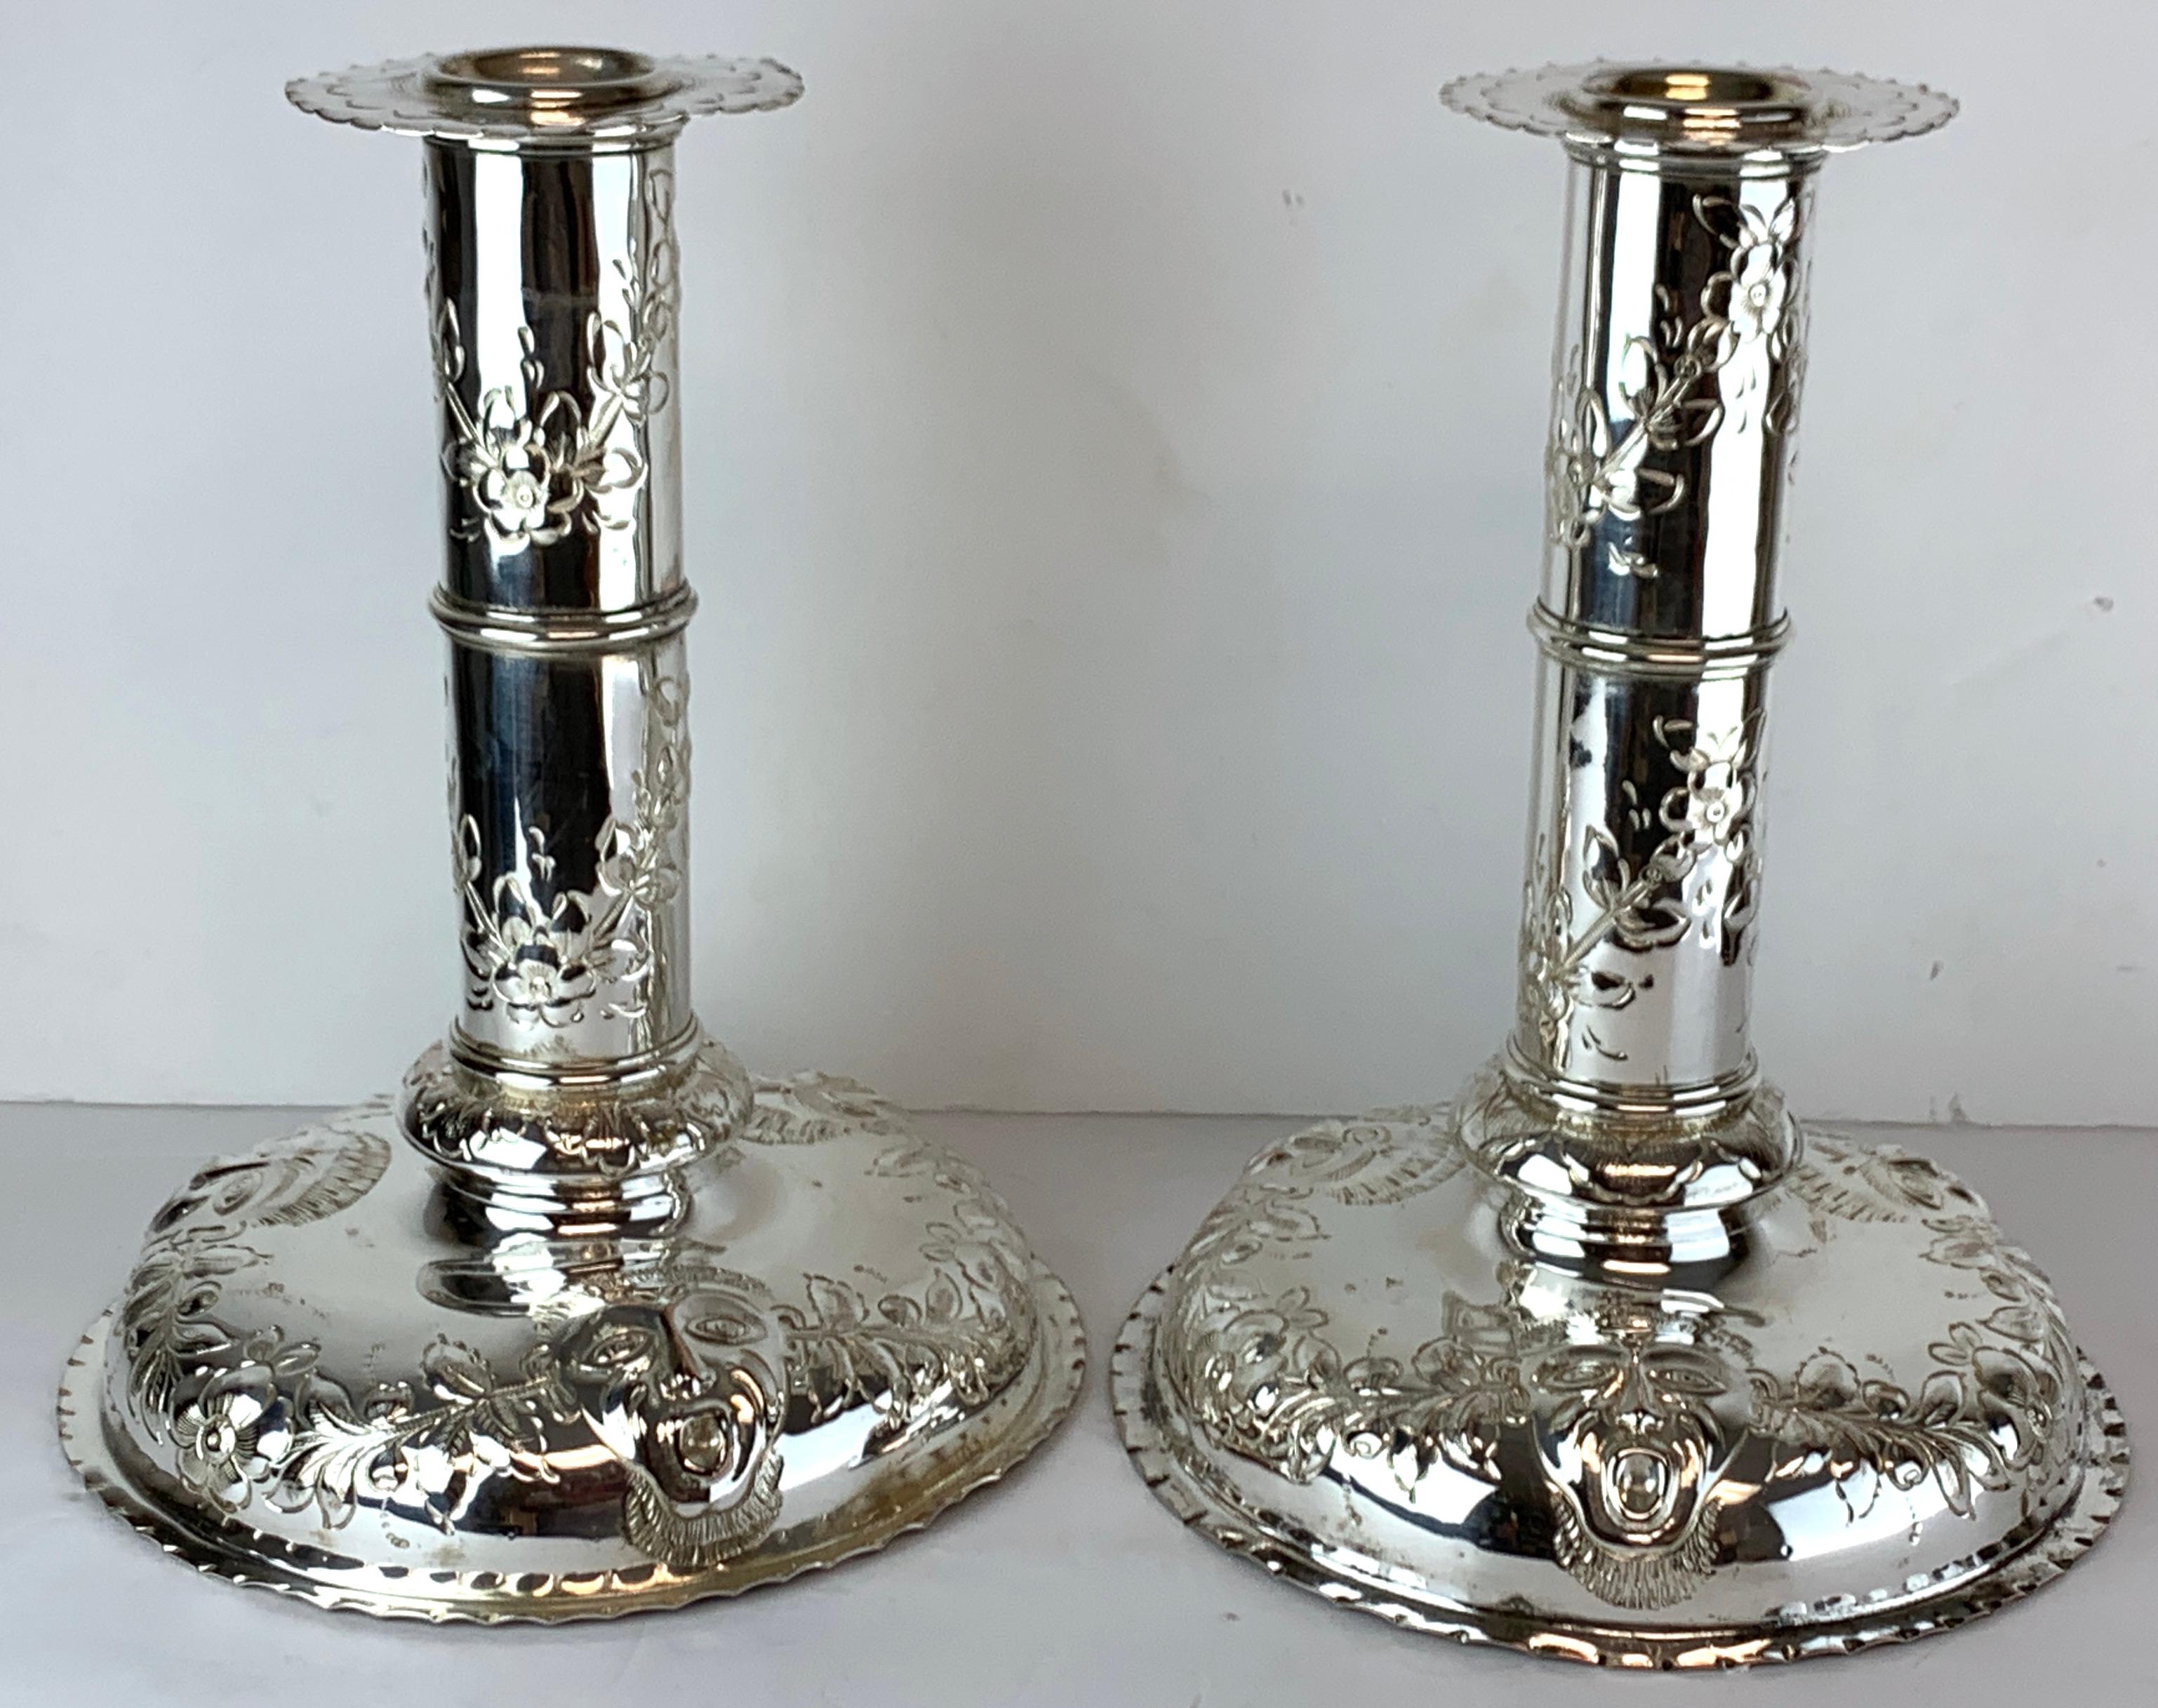 Pair of substantial antique Sheffield plate Venetian mask motif candlesticks. Each one with a 3.5